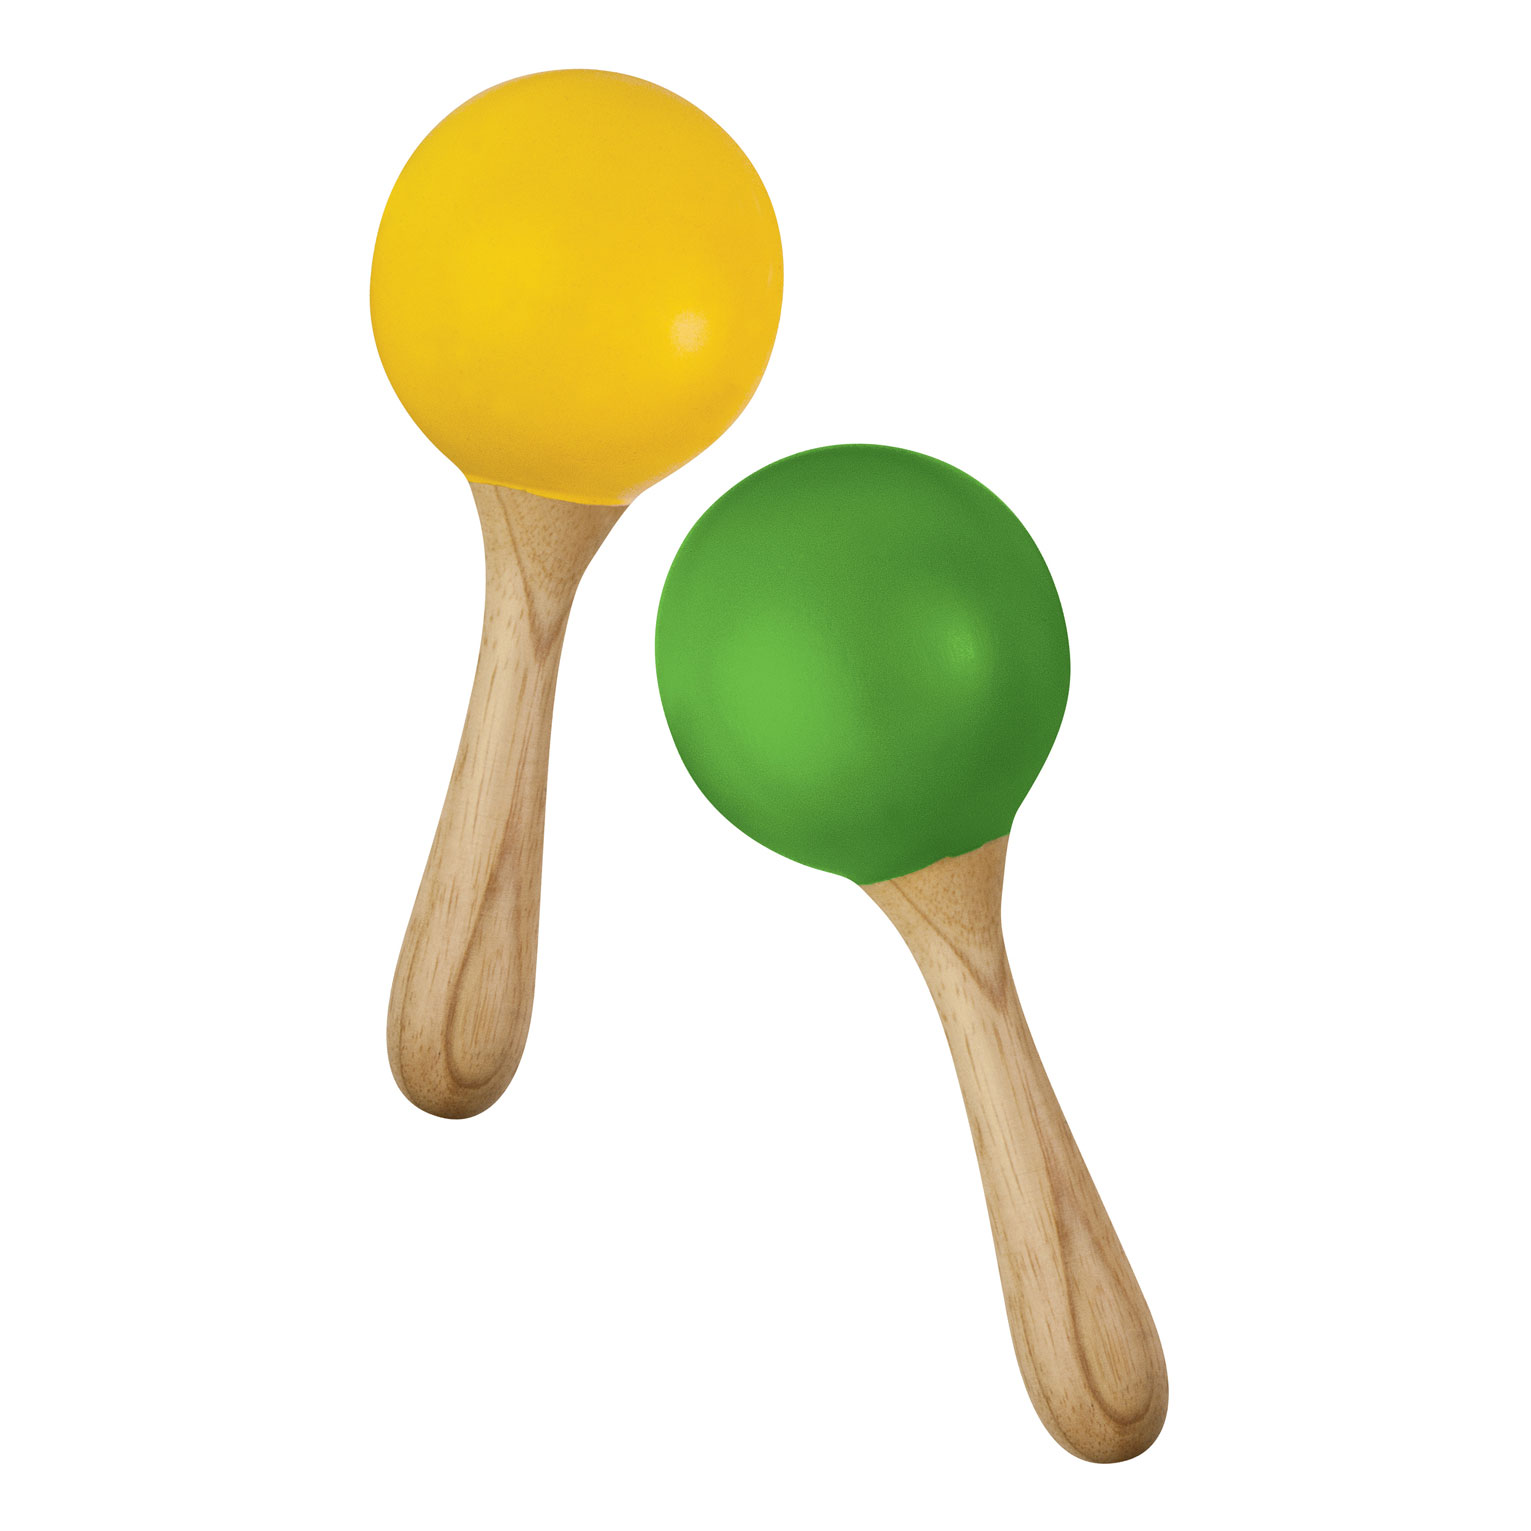 Green Toddler Maracas Set of 2 5 inches long 